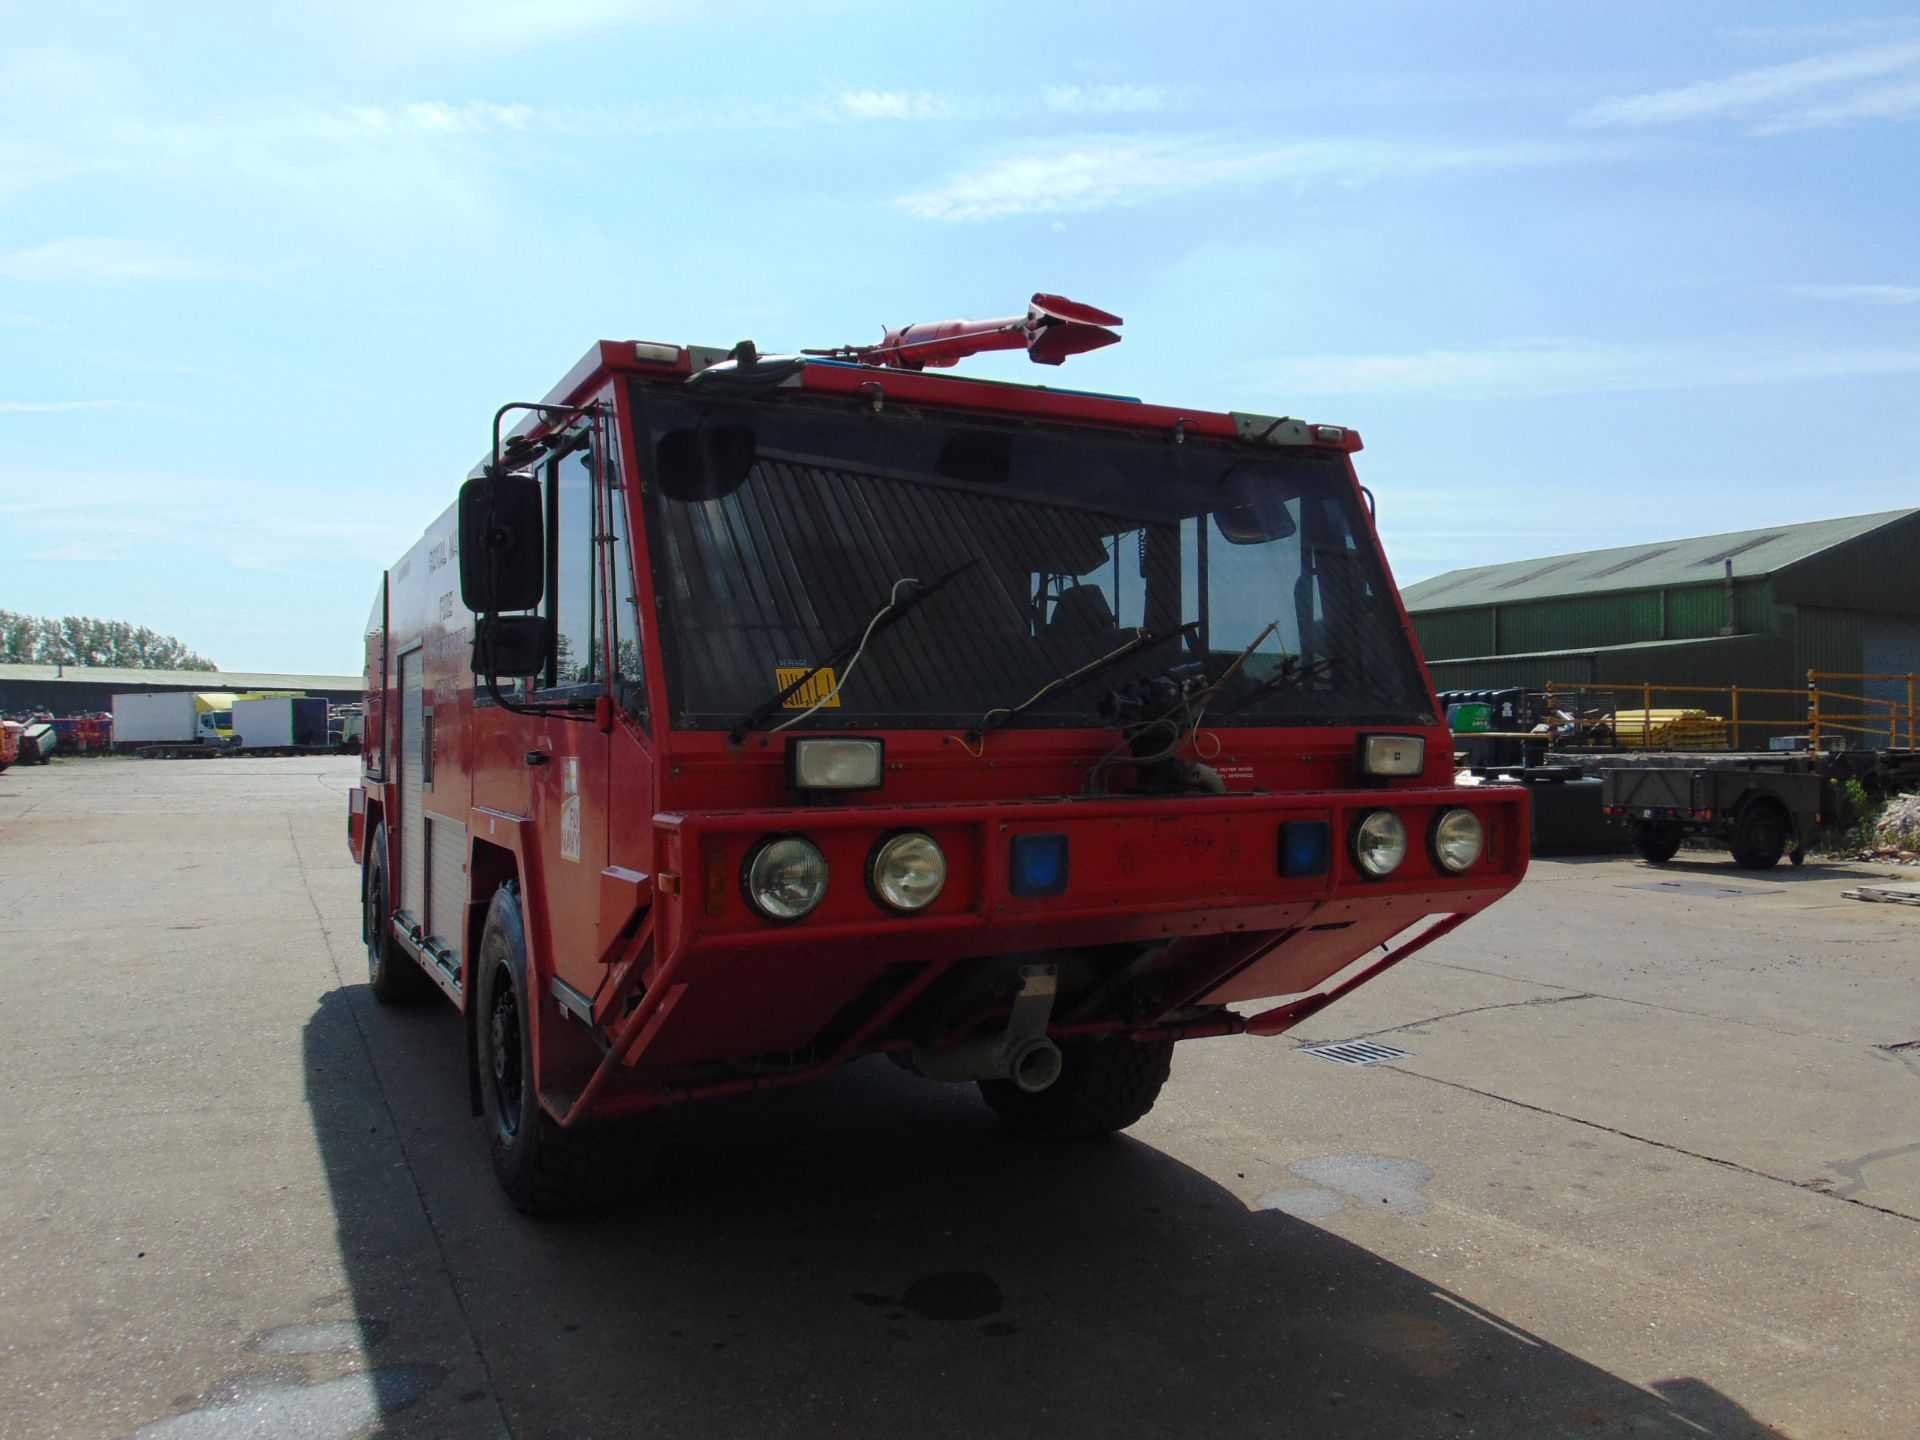 Unipower 4 x 4 Airport Fire Fighting Appliance - Rapid Intervention Vehicle - Image 6 of 73